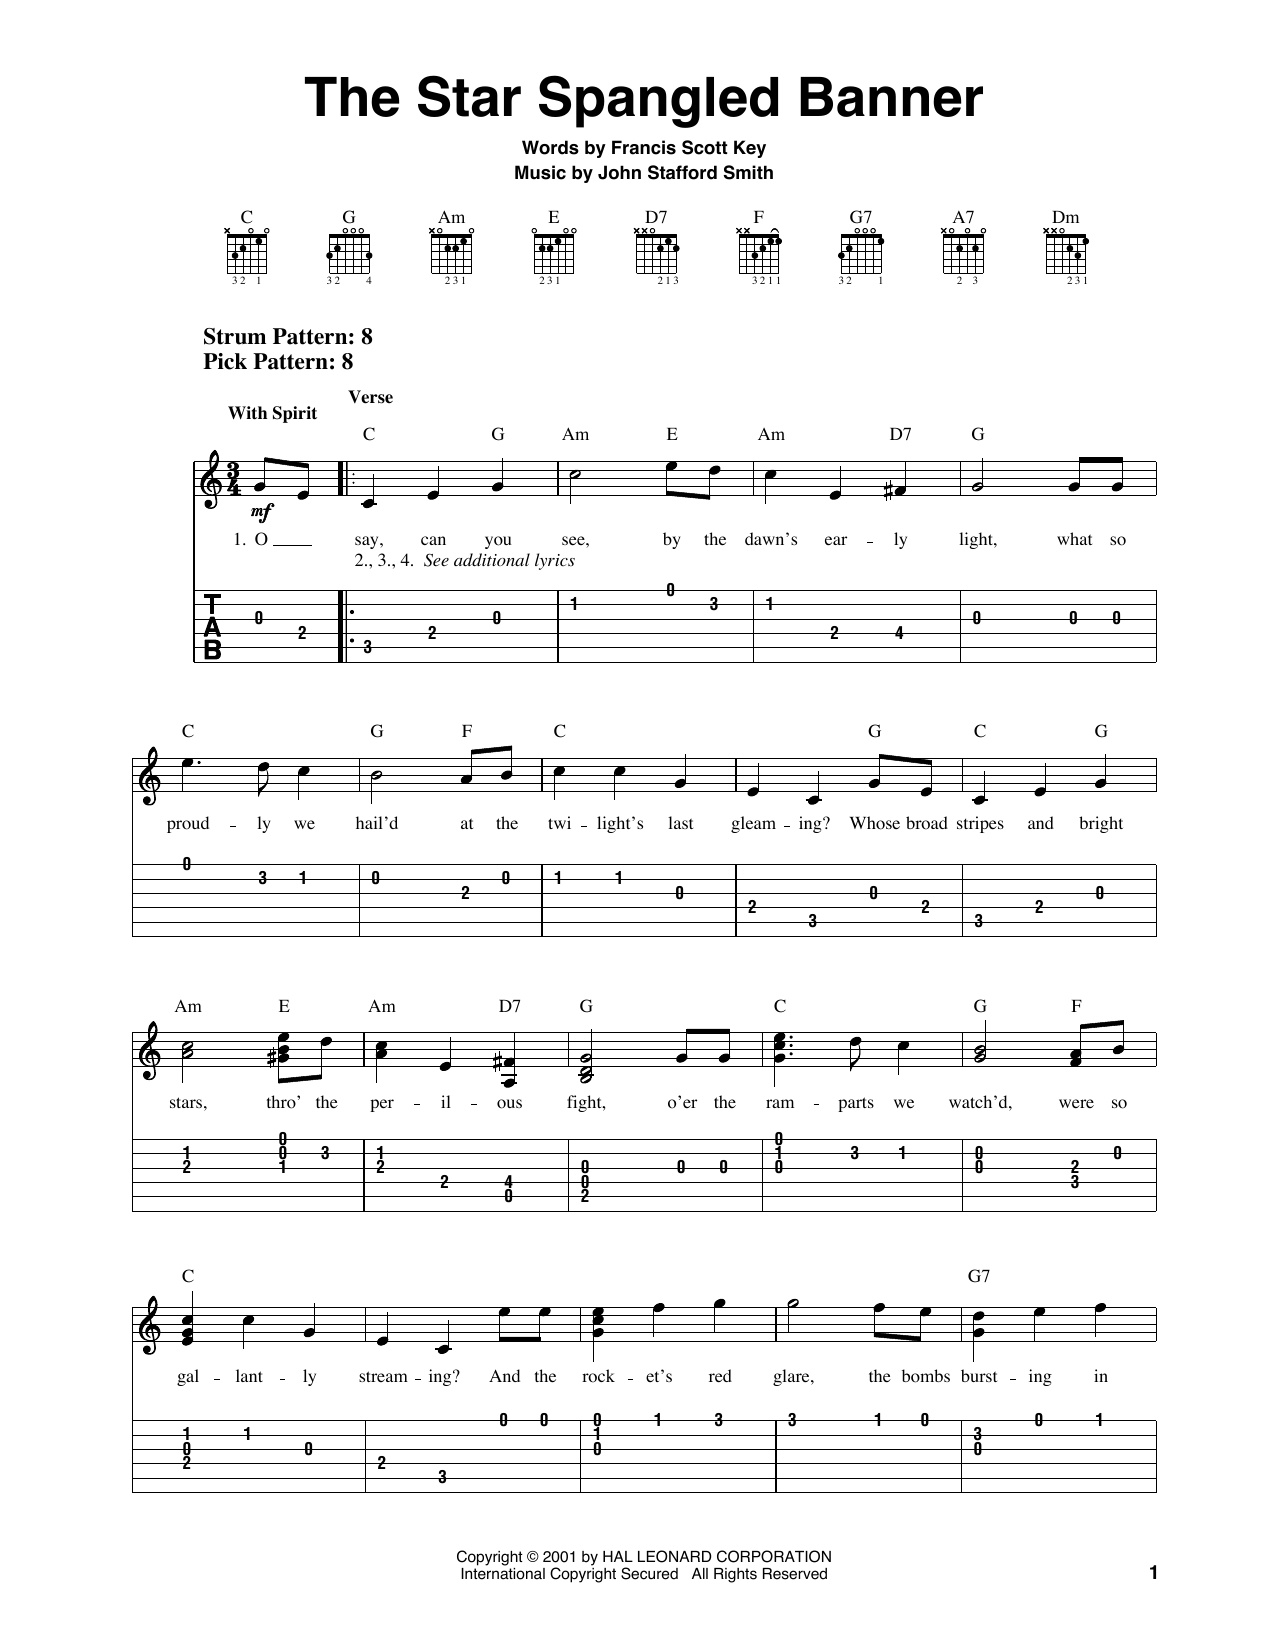 Download Francis Scott Key The Star Spangled Banner Sheet Music